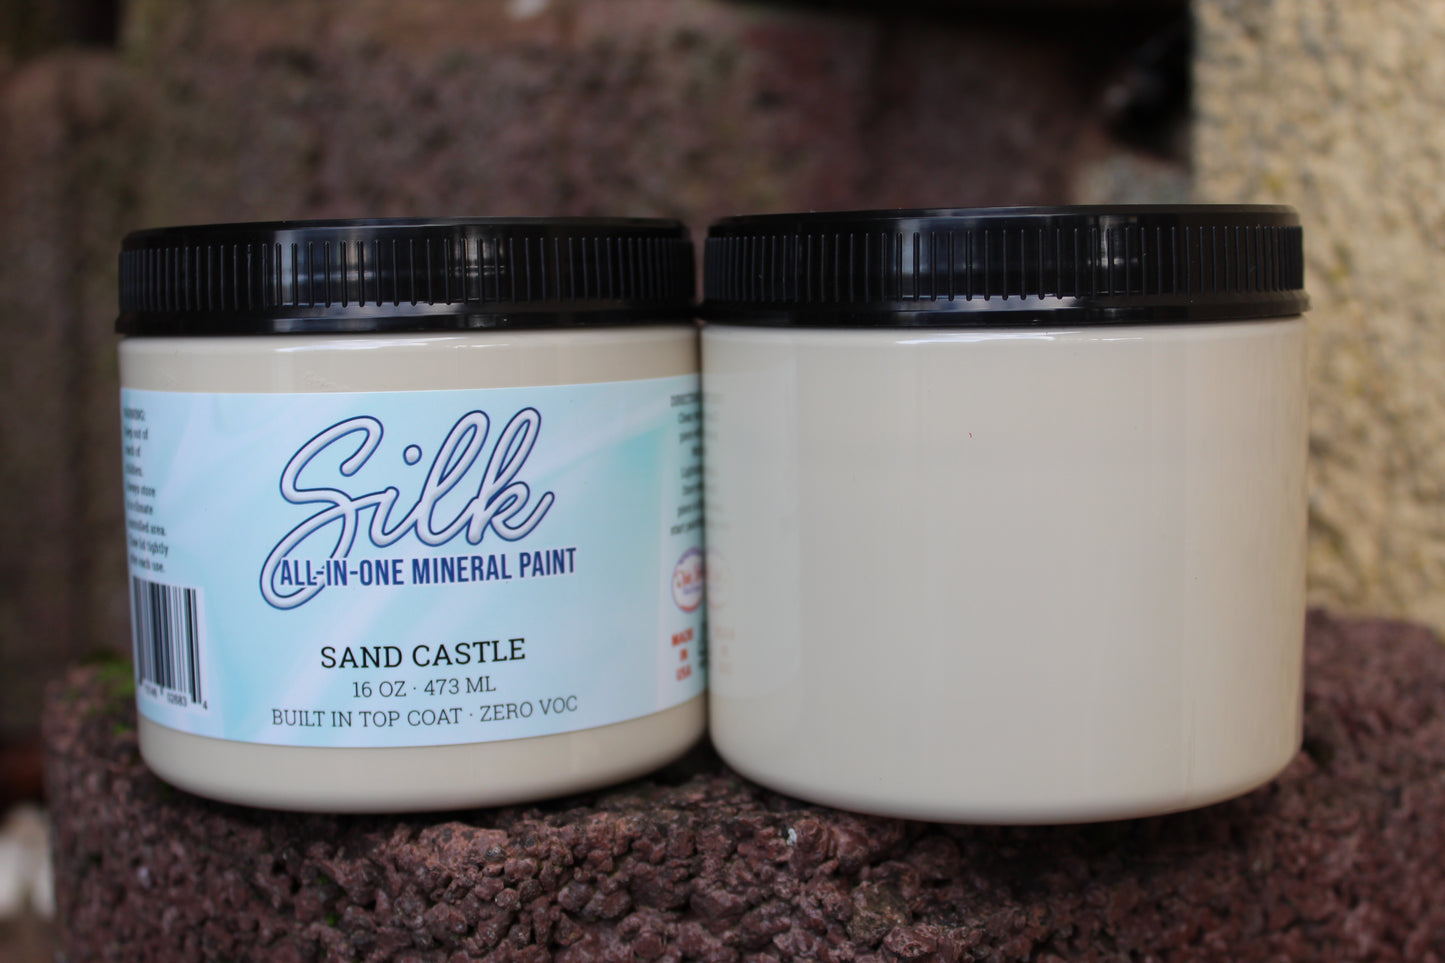 Sand Castle Silk All-In-One Mineral Paint